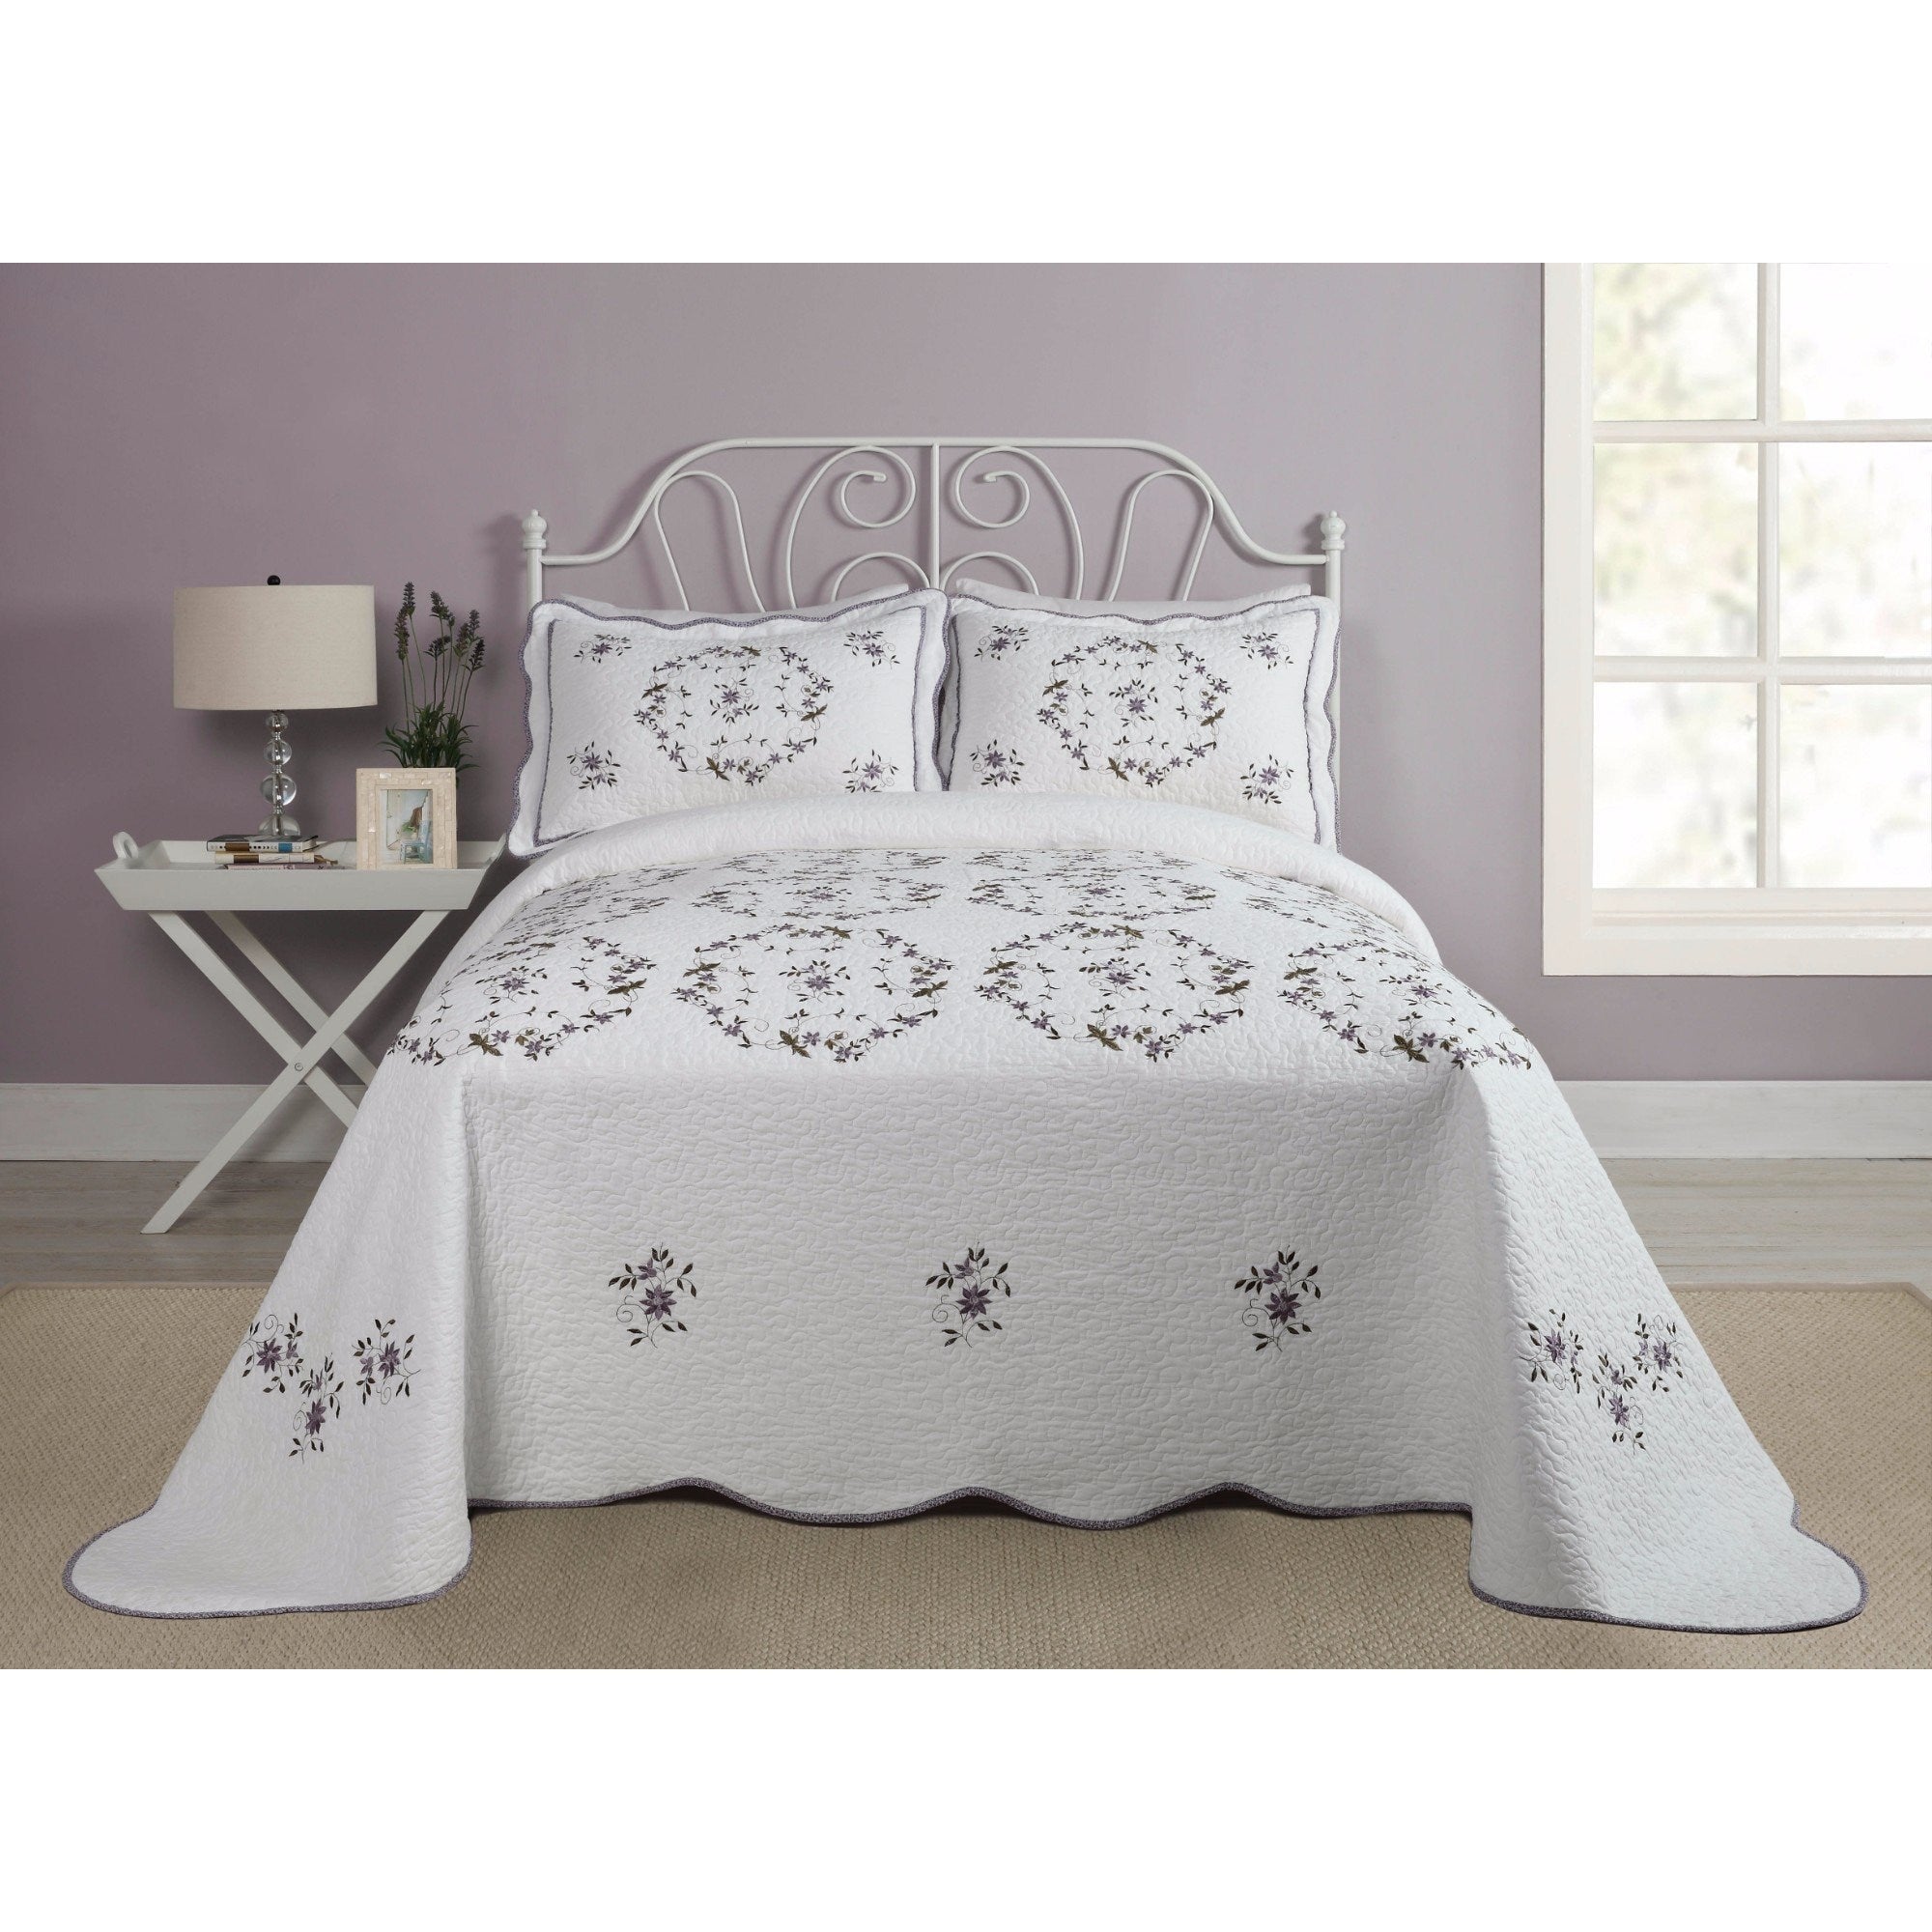 Green Off White Country Floral Oversized Bedspread Purple Trim Classic Diamond Home